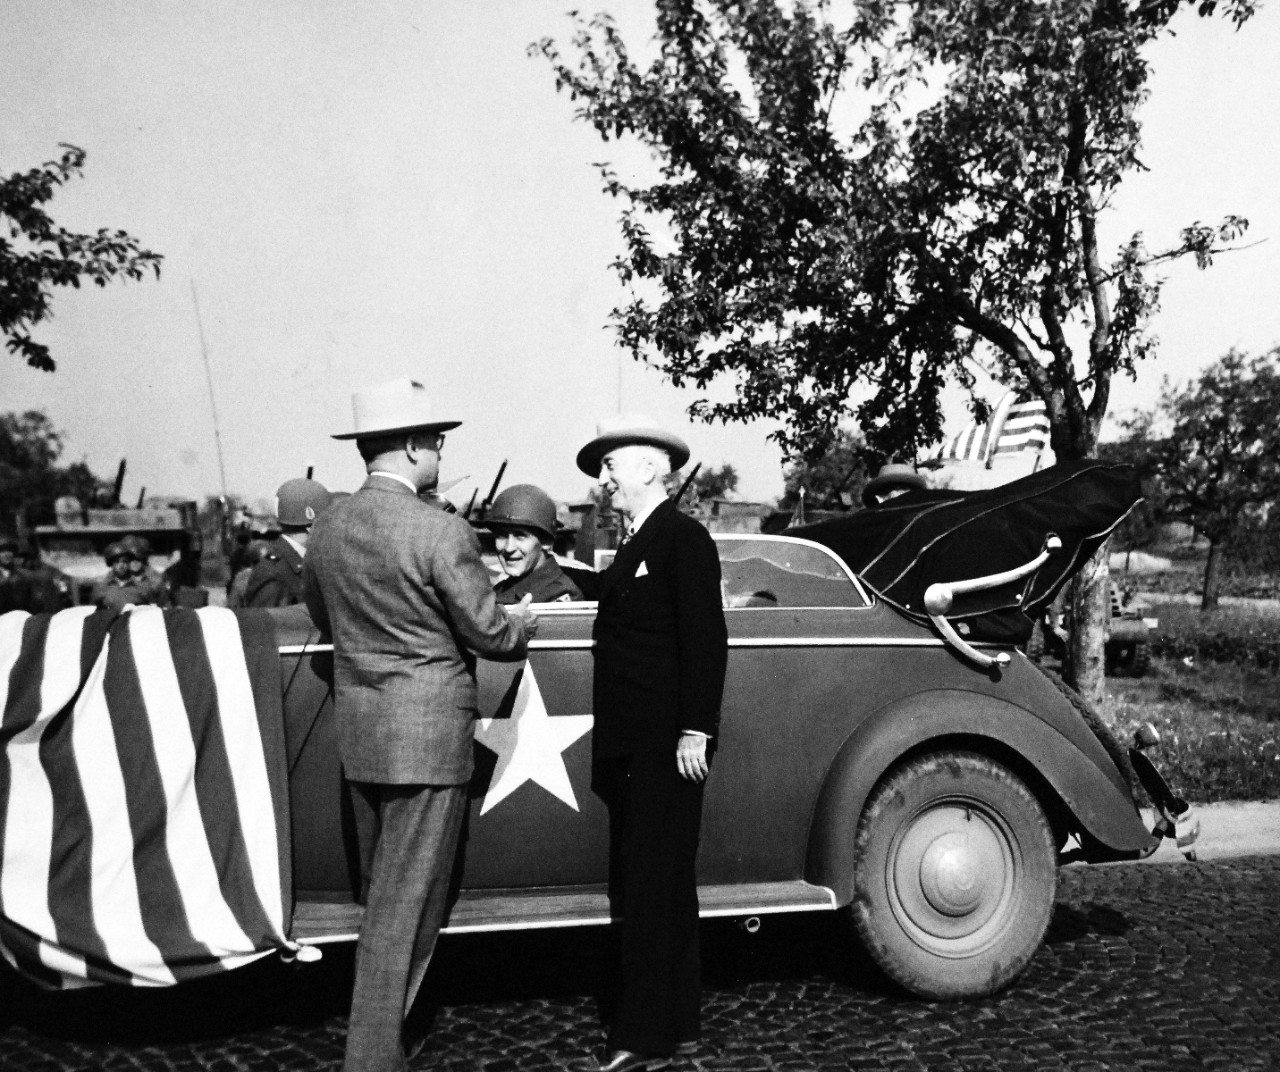 80-G-700166: Potsdam Conference, July-August 1945.  President Harry S. Truman introducing his driver, Private First Class Warren E. Baker to Secretary of State James F. Byrnes, both from the same home town.  President Truman had been inspecting the 3Rd Armored Division near Frankfurt, Germany.  Photographed by CPhoM William Belknap Jr., released July 26, 1945.   Official U.S. Navy Photograph, now in the collections of the National Archives.  (2016/02/23).